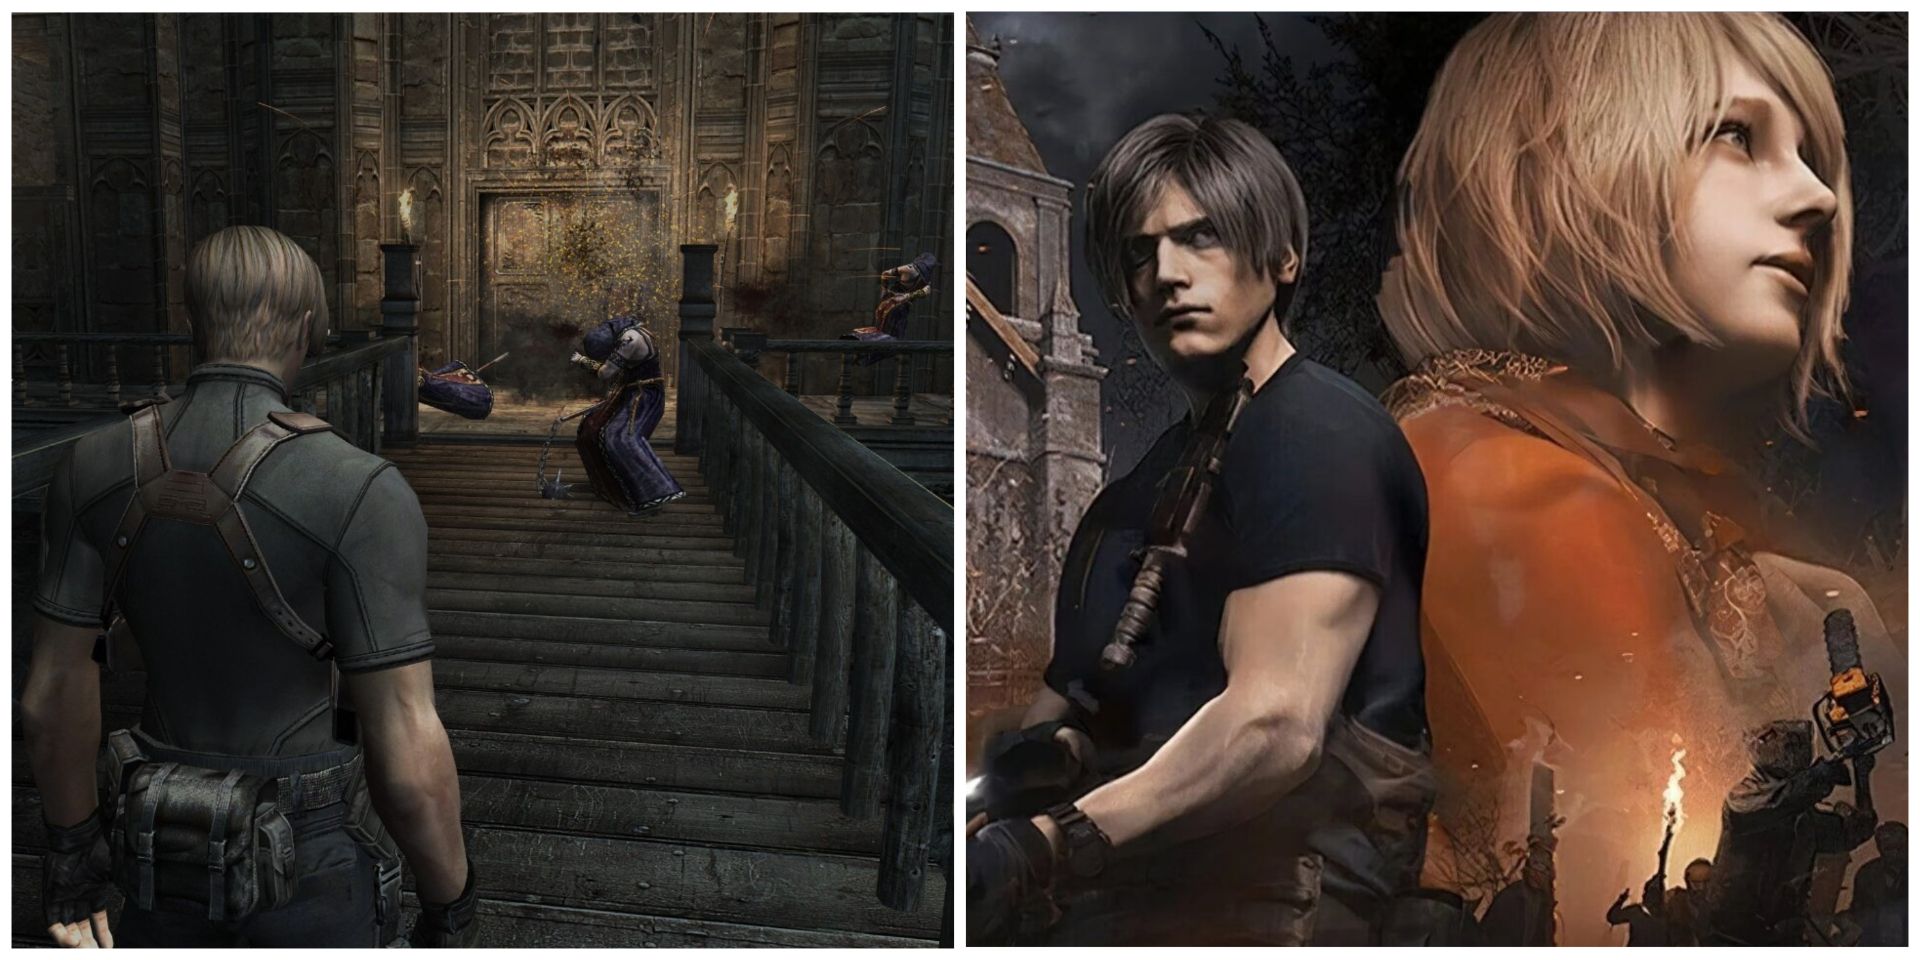 Resident Evil 4 Remake' Video Game Review: New Game Honors Original